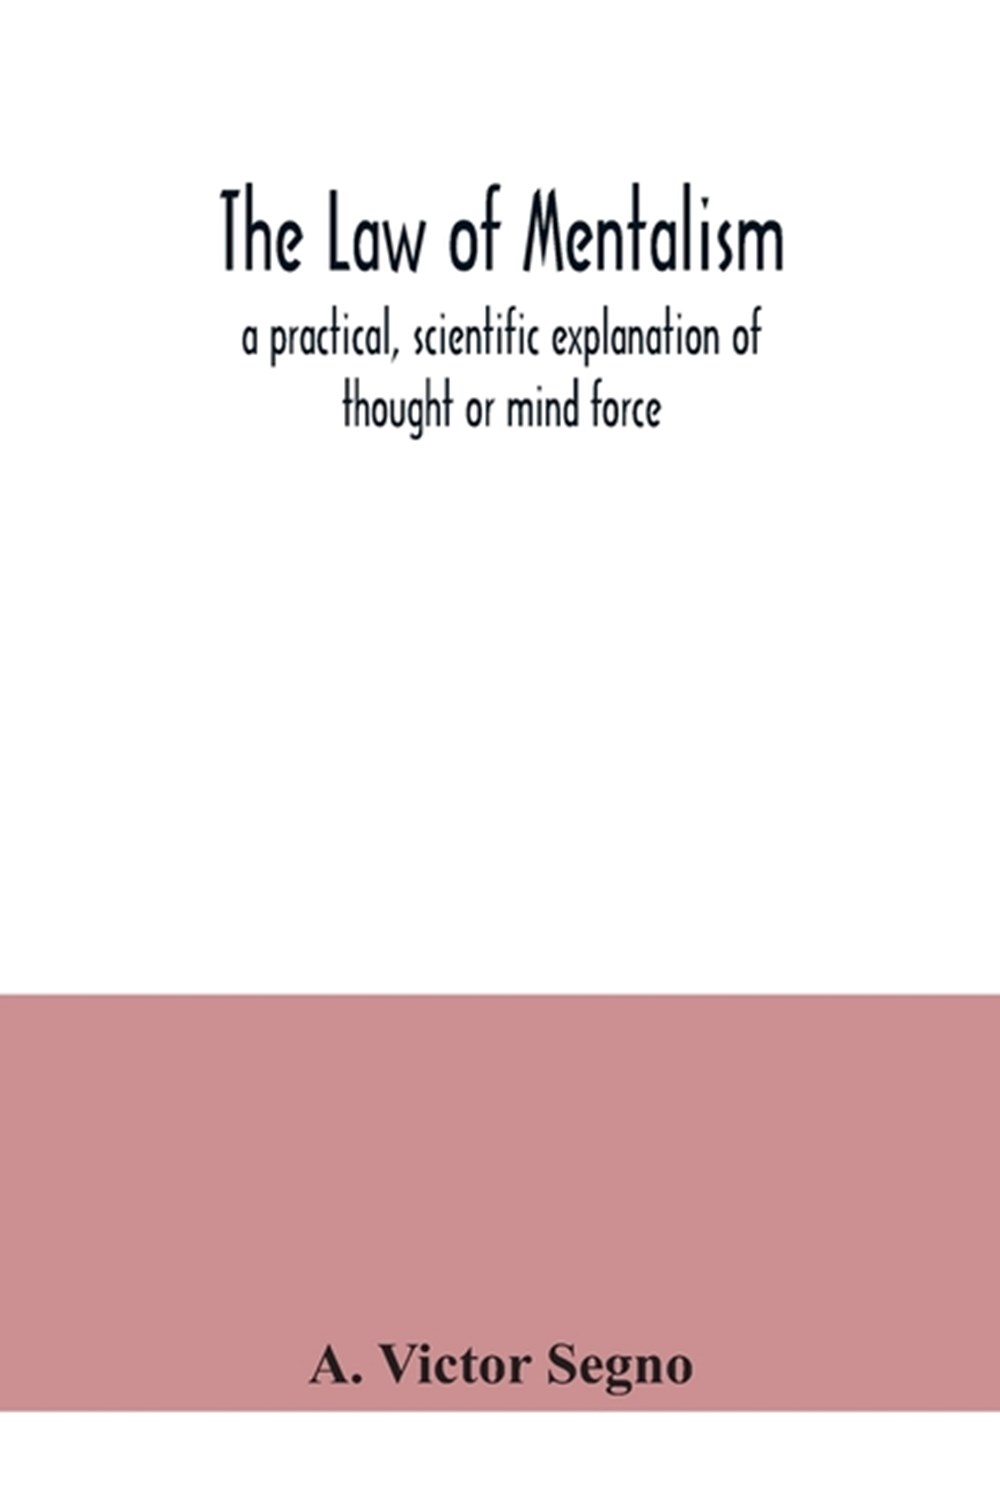 law of mentalism: a practical, scientific explanation of thought or mind force: the law which govern